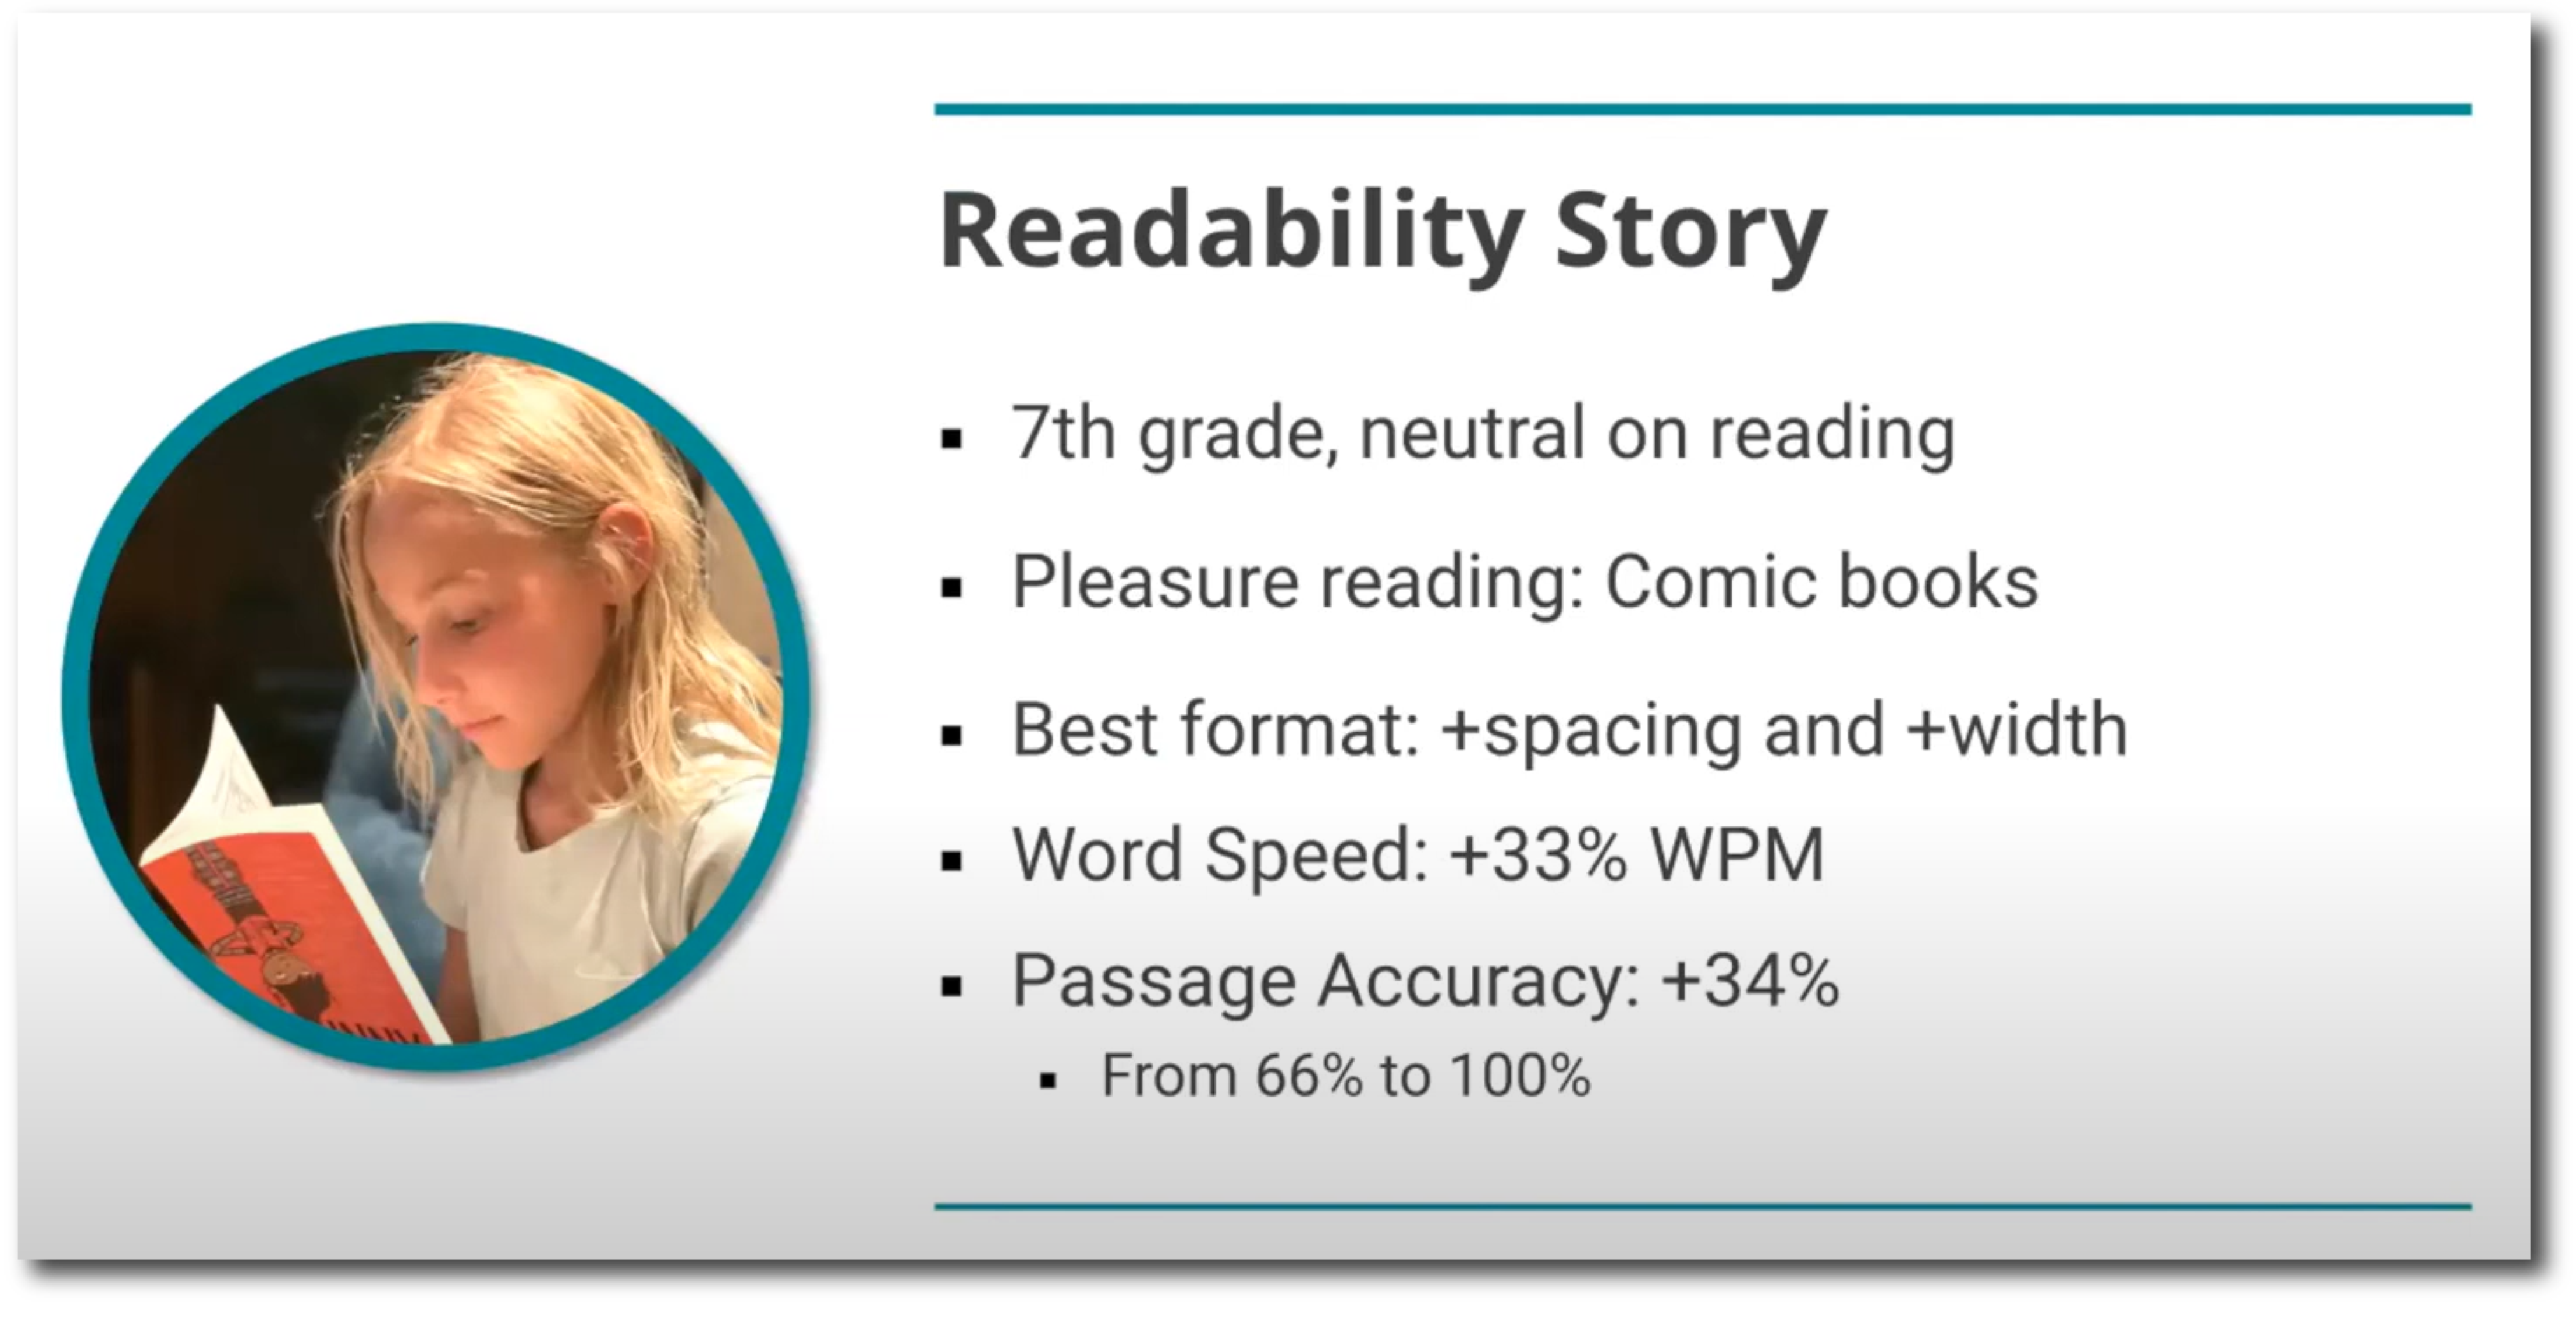 Readability Story: 7th grader gains 33% in reading speed (WCPM) and gains 34% in passage accuracy